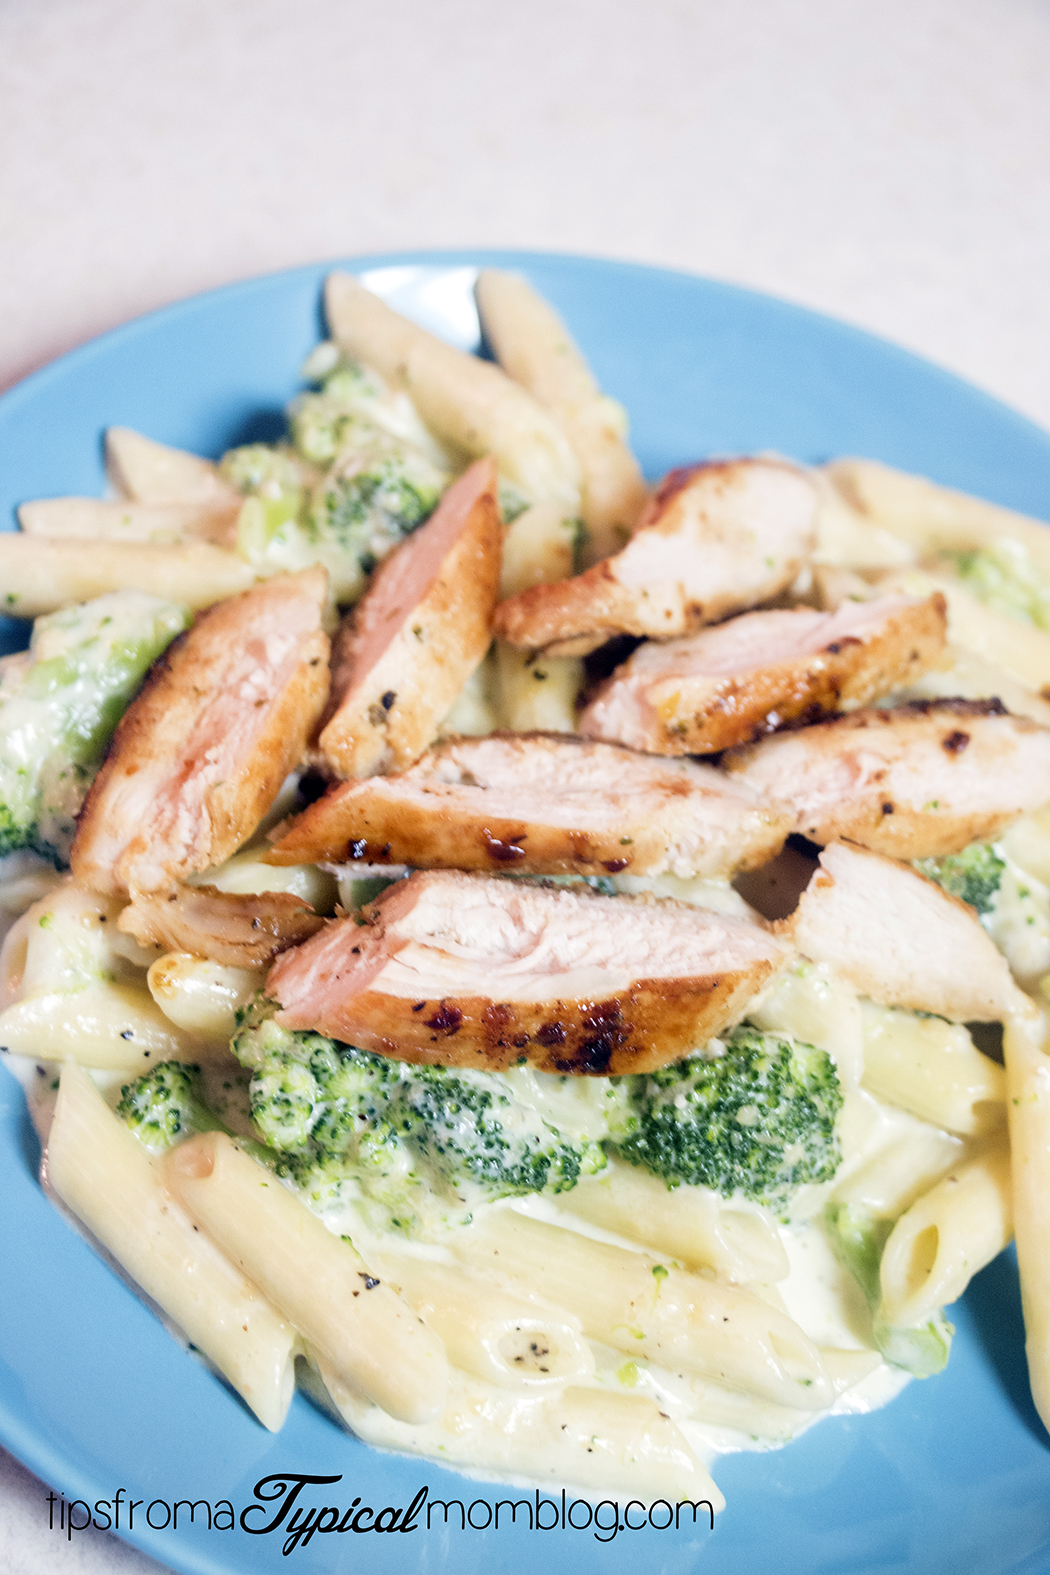 Chicken & Broccoli Penne Pasta with Homemade Alfredo Sauce - Tips from